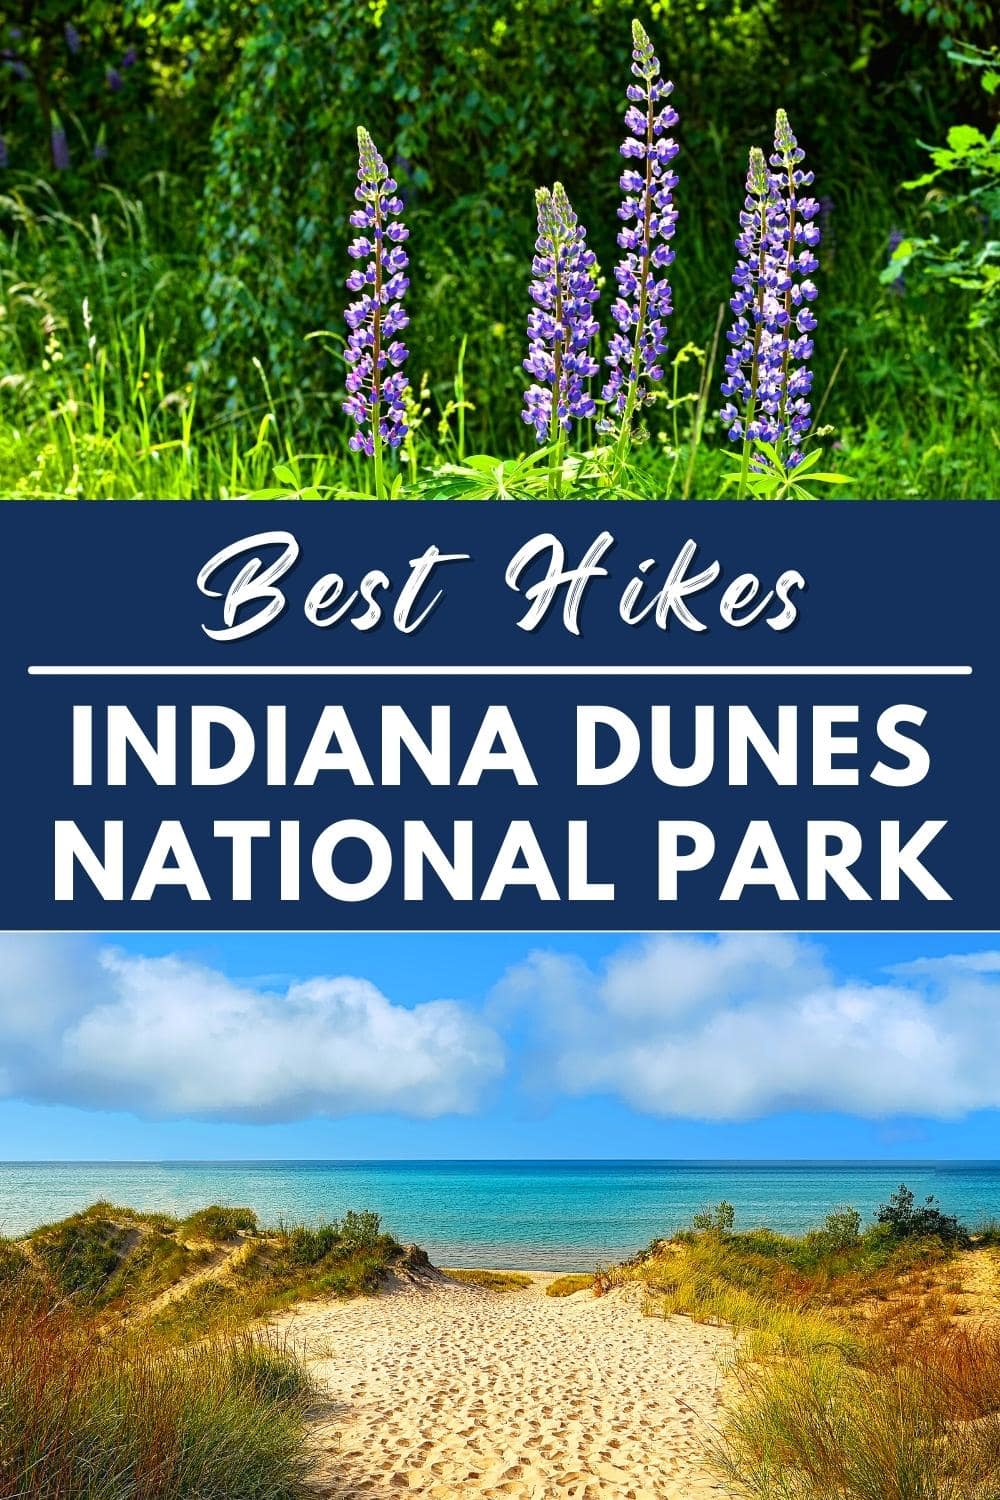 The 8 Best Hikes in Indiana Dunes National Park: Sunset Views + More!